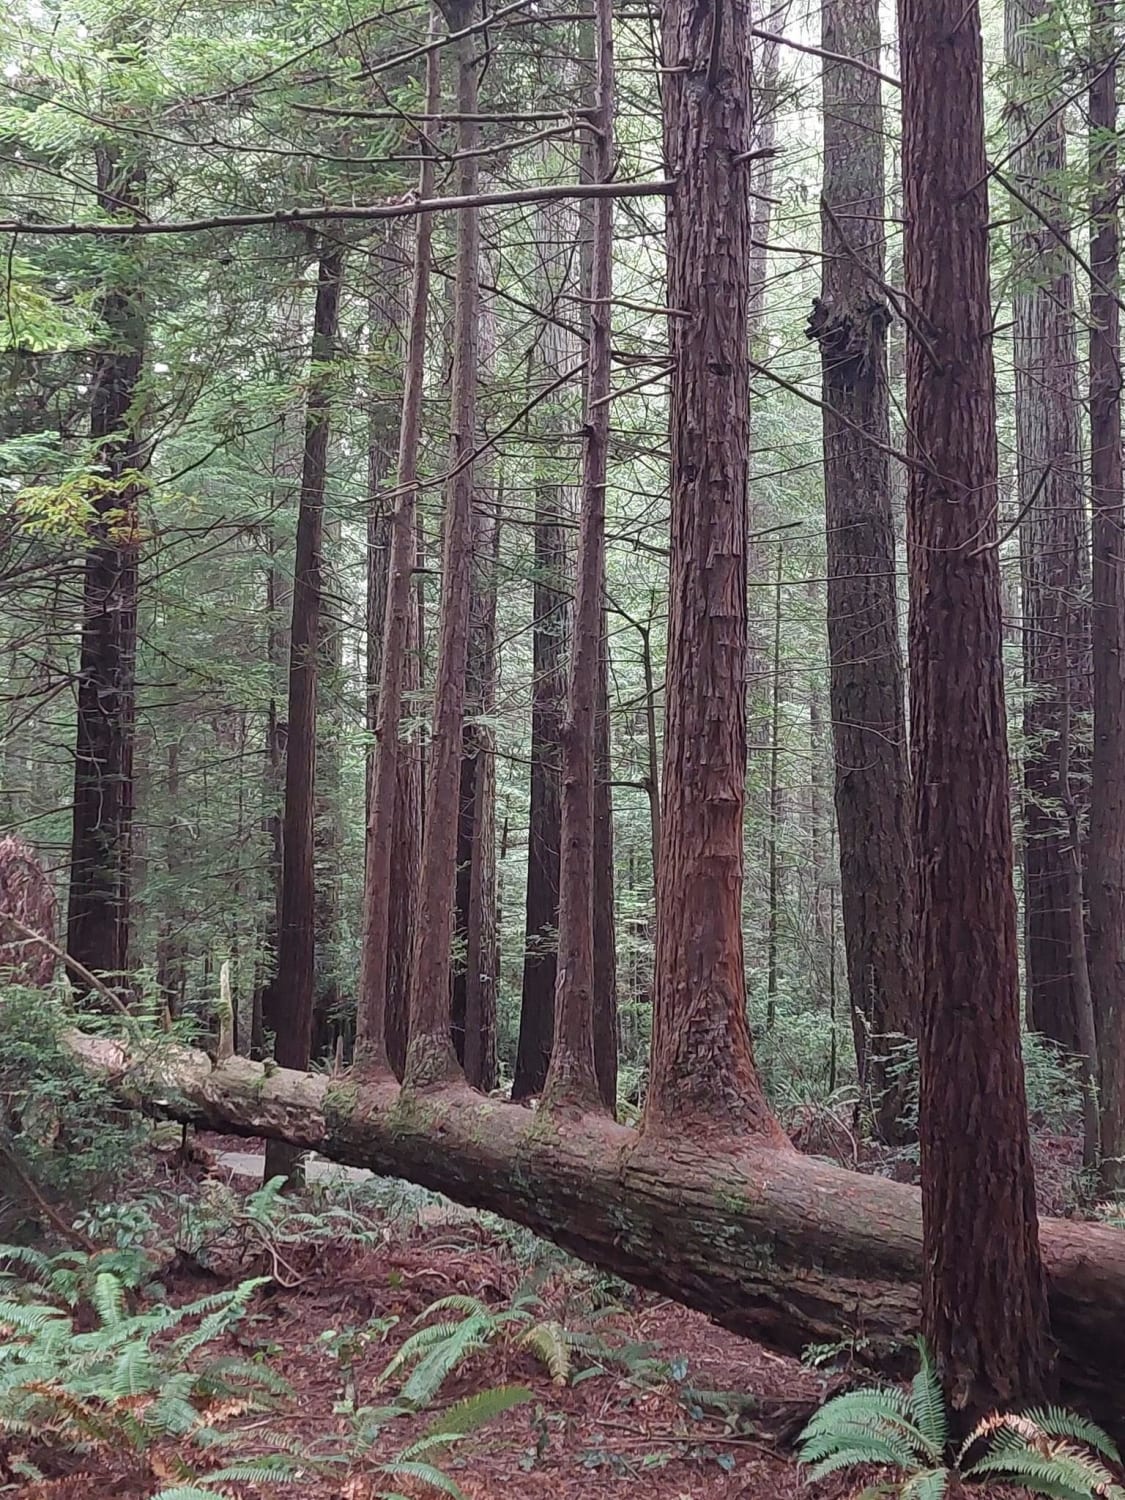 Fallen redwood tree in California gives rise to muliple other trees.